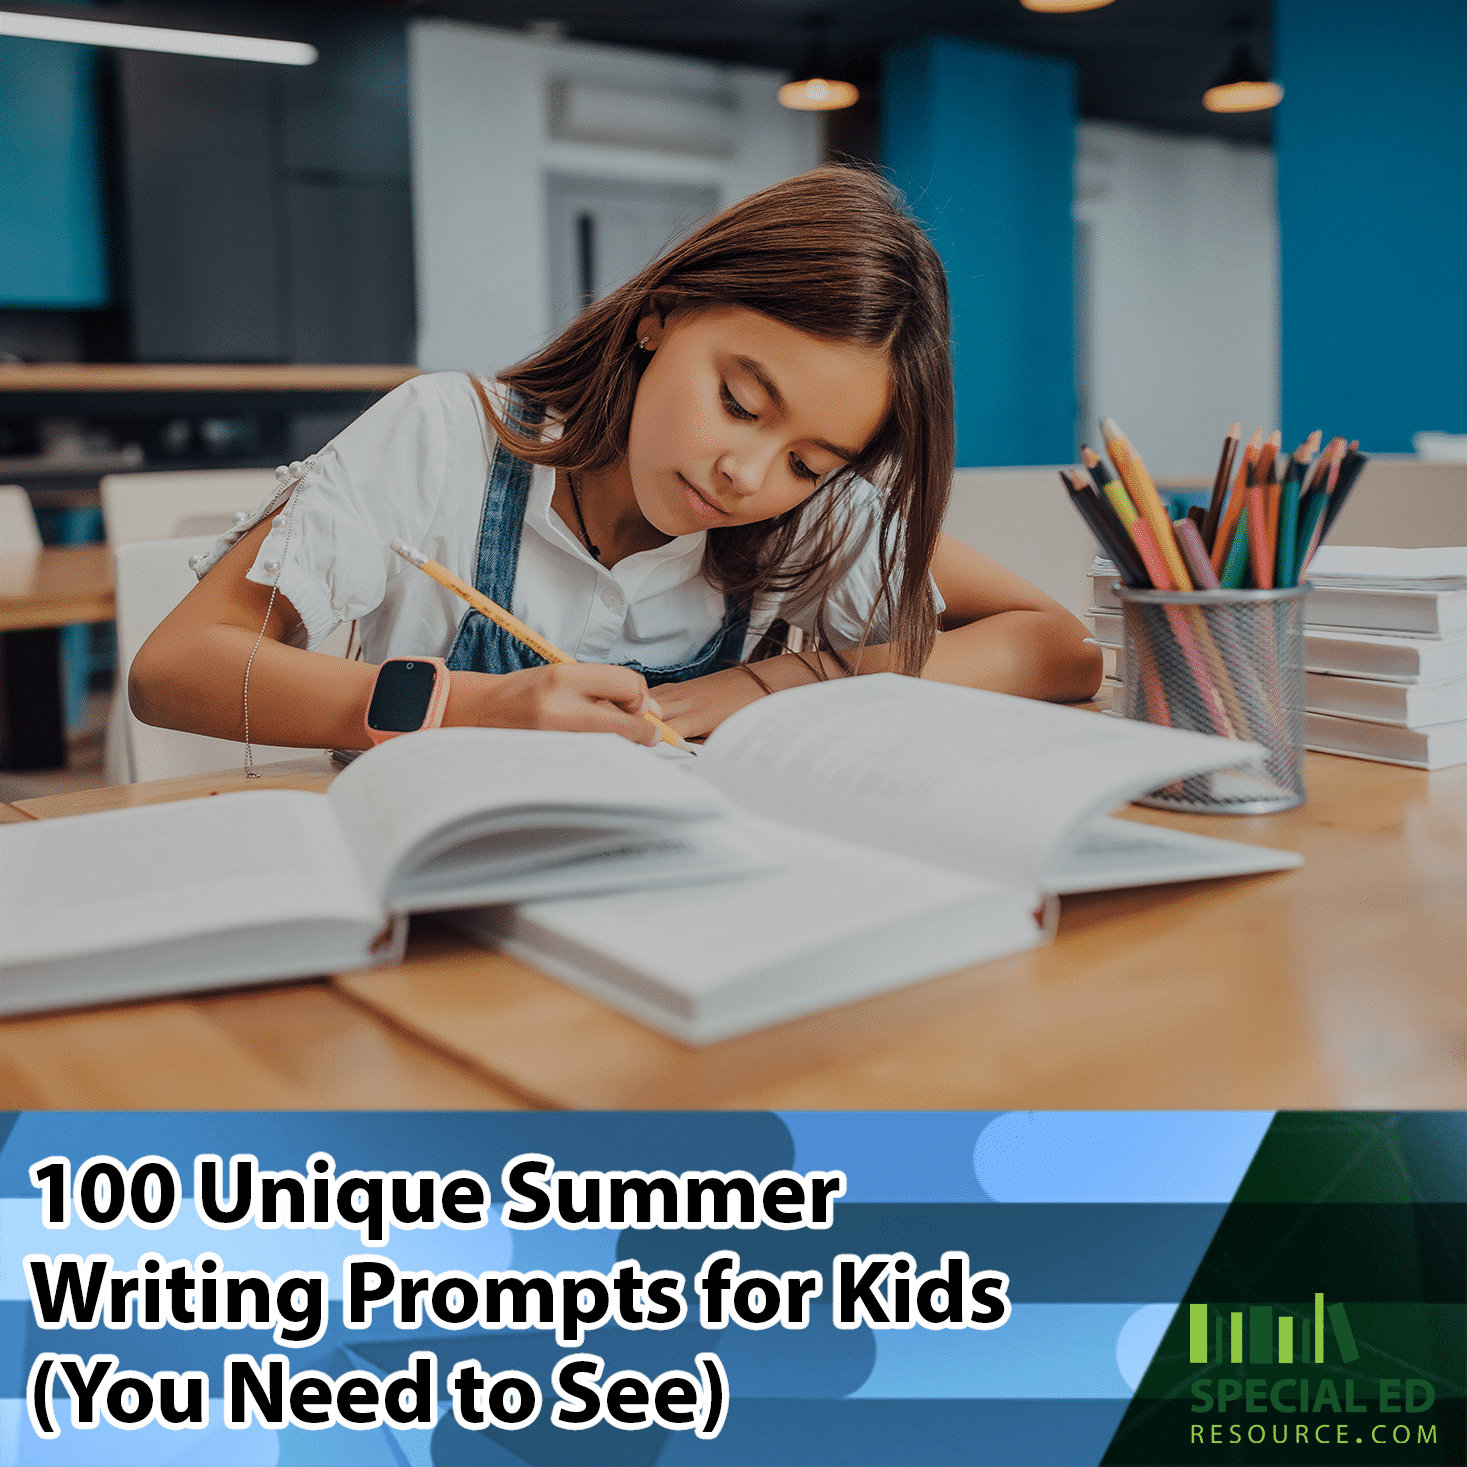 Young girl sitting at desk in her room at home doing one of these 100 Summer writing prompts for kids.